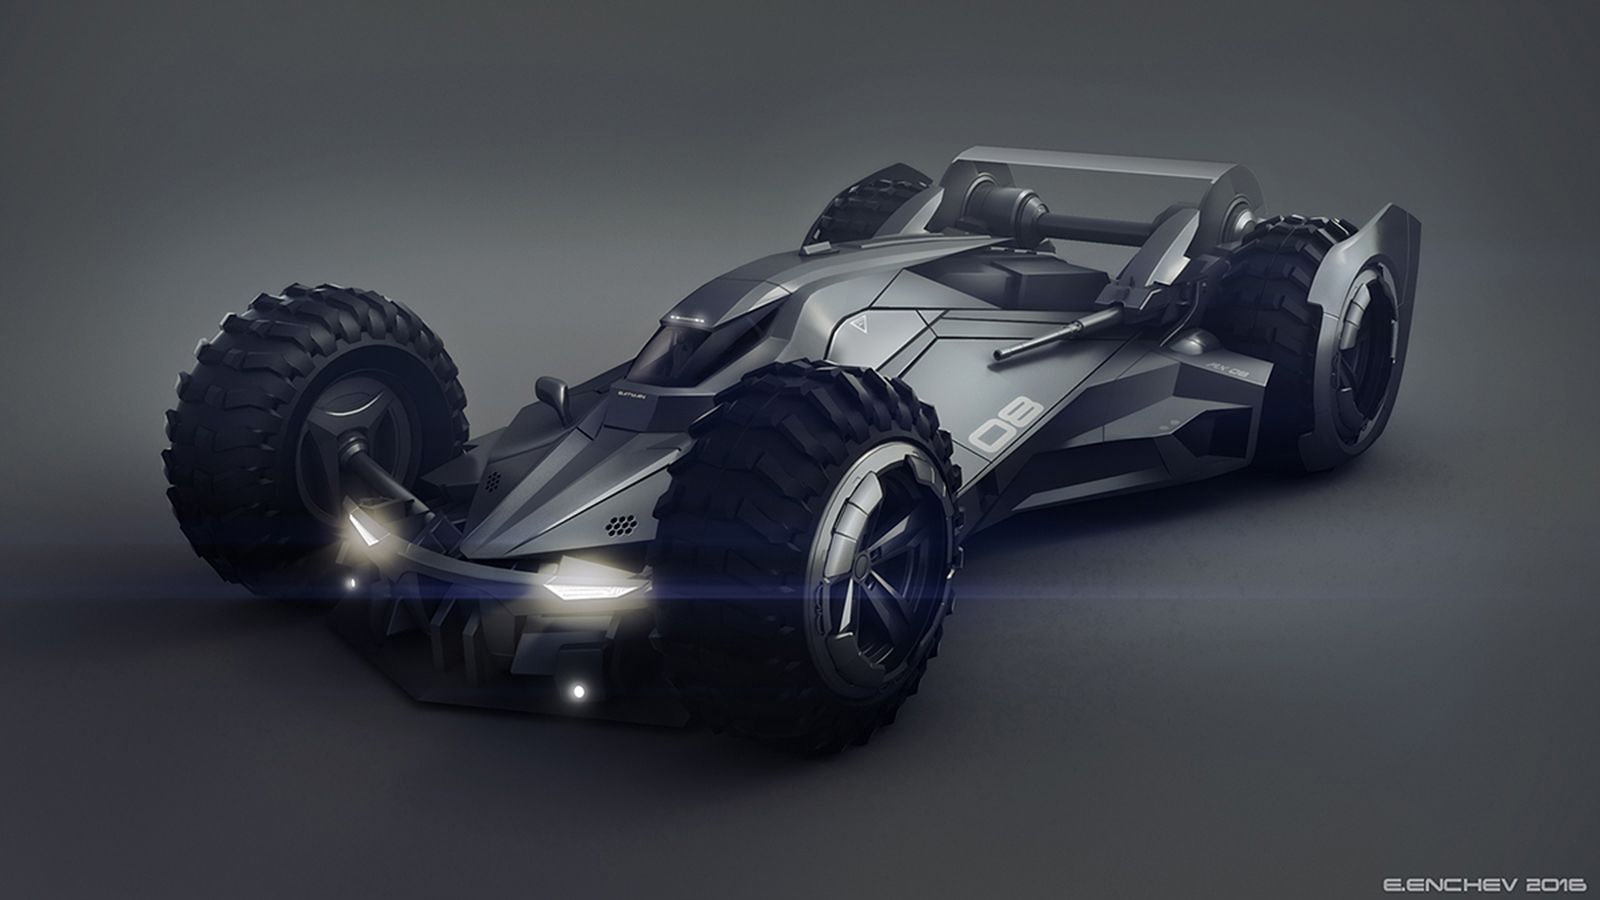 this batmobile concept is the best we’ve ever seen please use it batfleck image 1